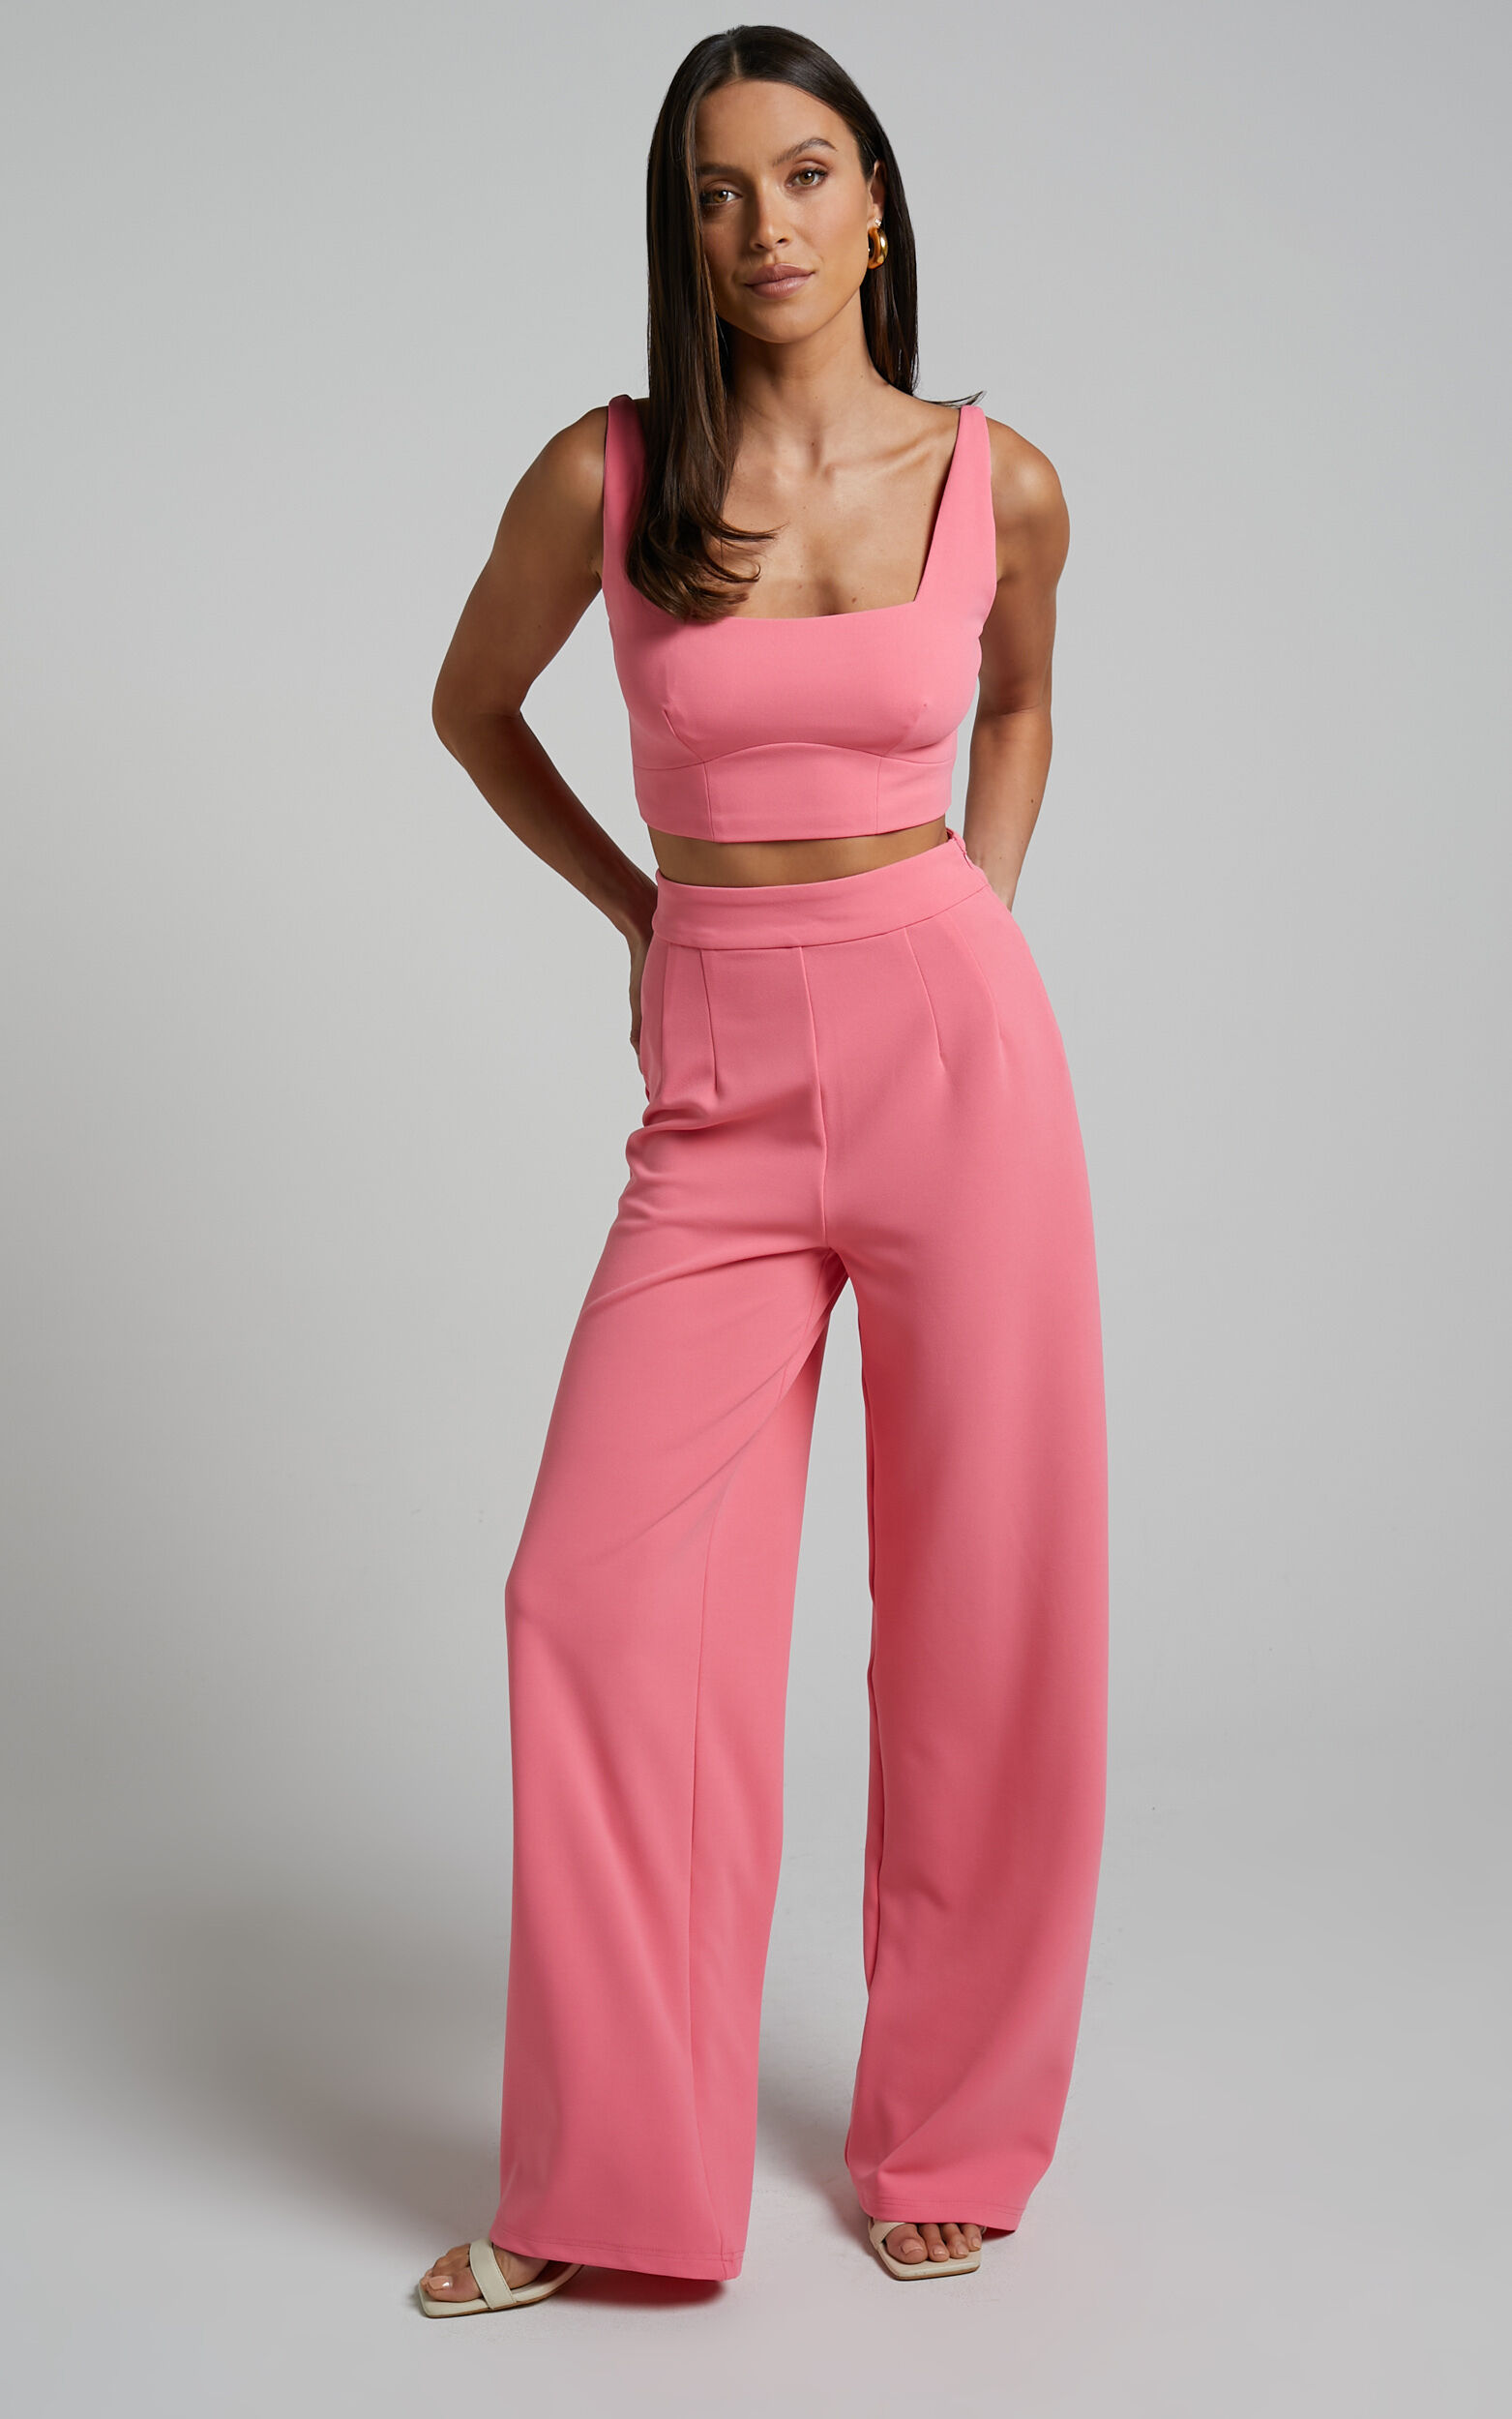 Elibeth Two Piece Set - Crop Top and High Waisted Wide Leg Pants Set in  Bubblegum Pink